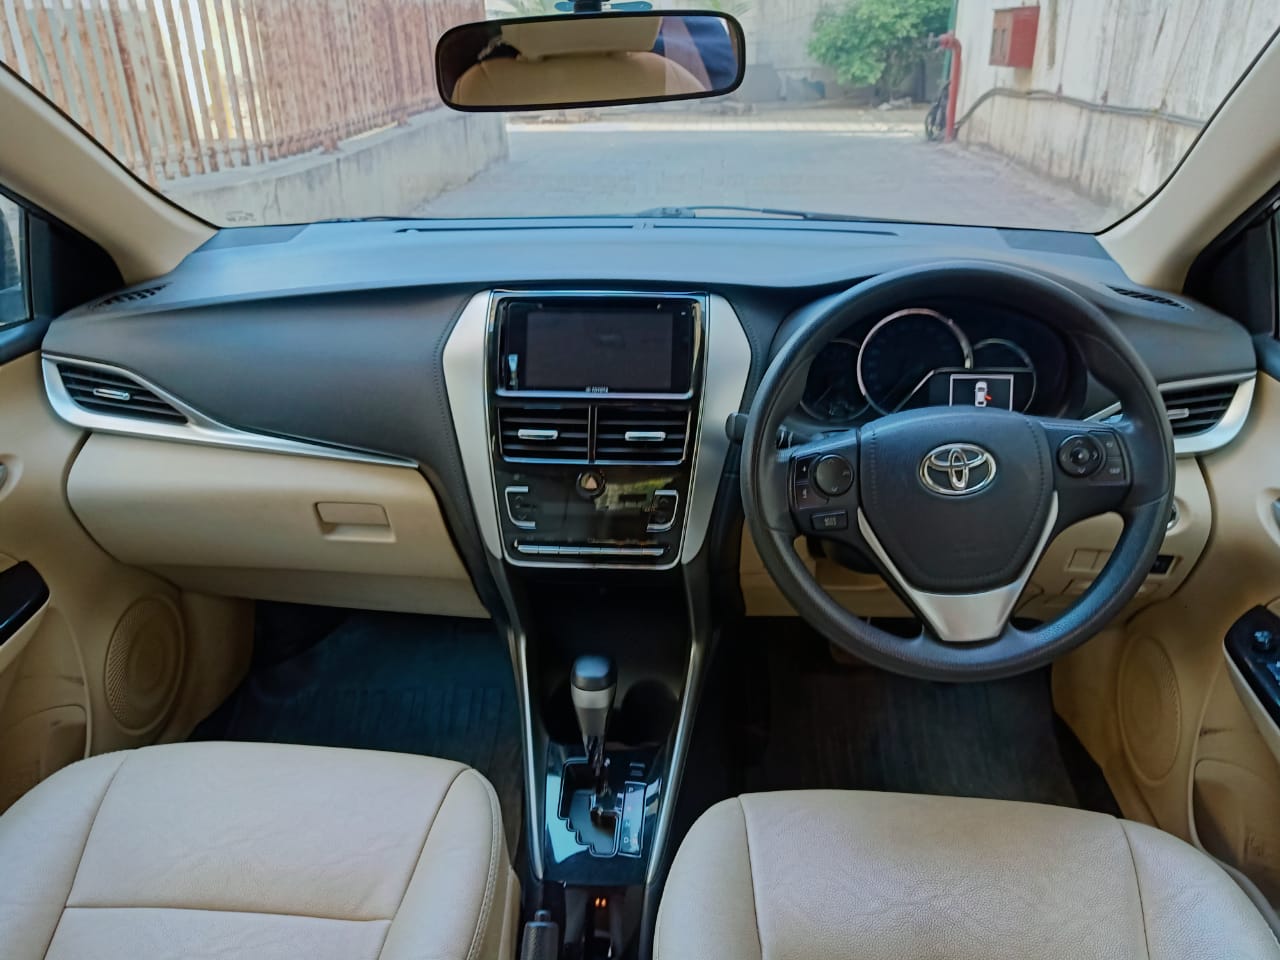 Toyota Yaris - Cabin and Practicality 